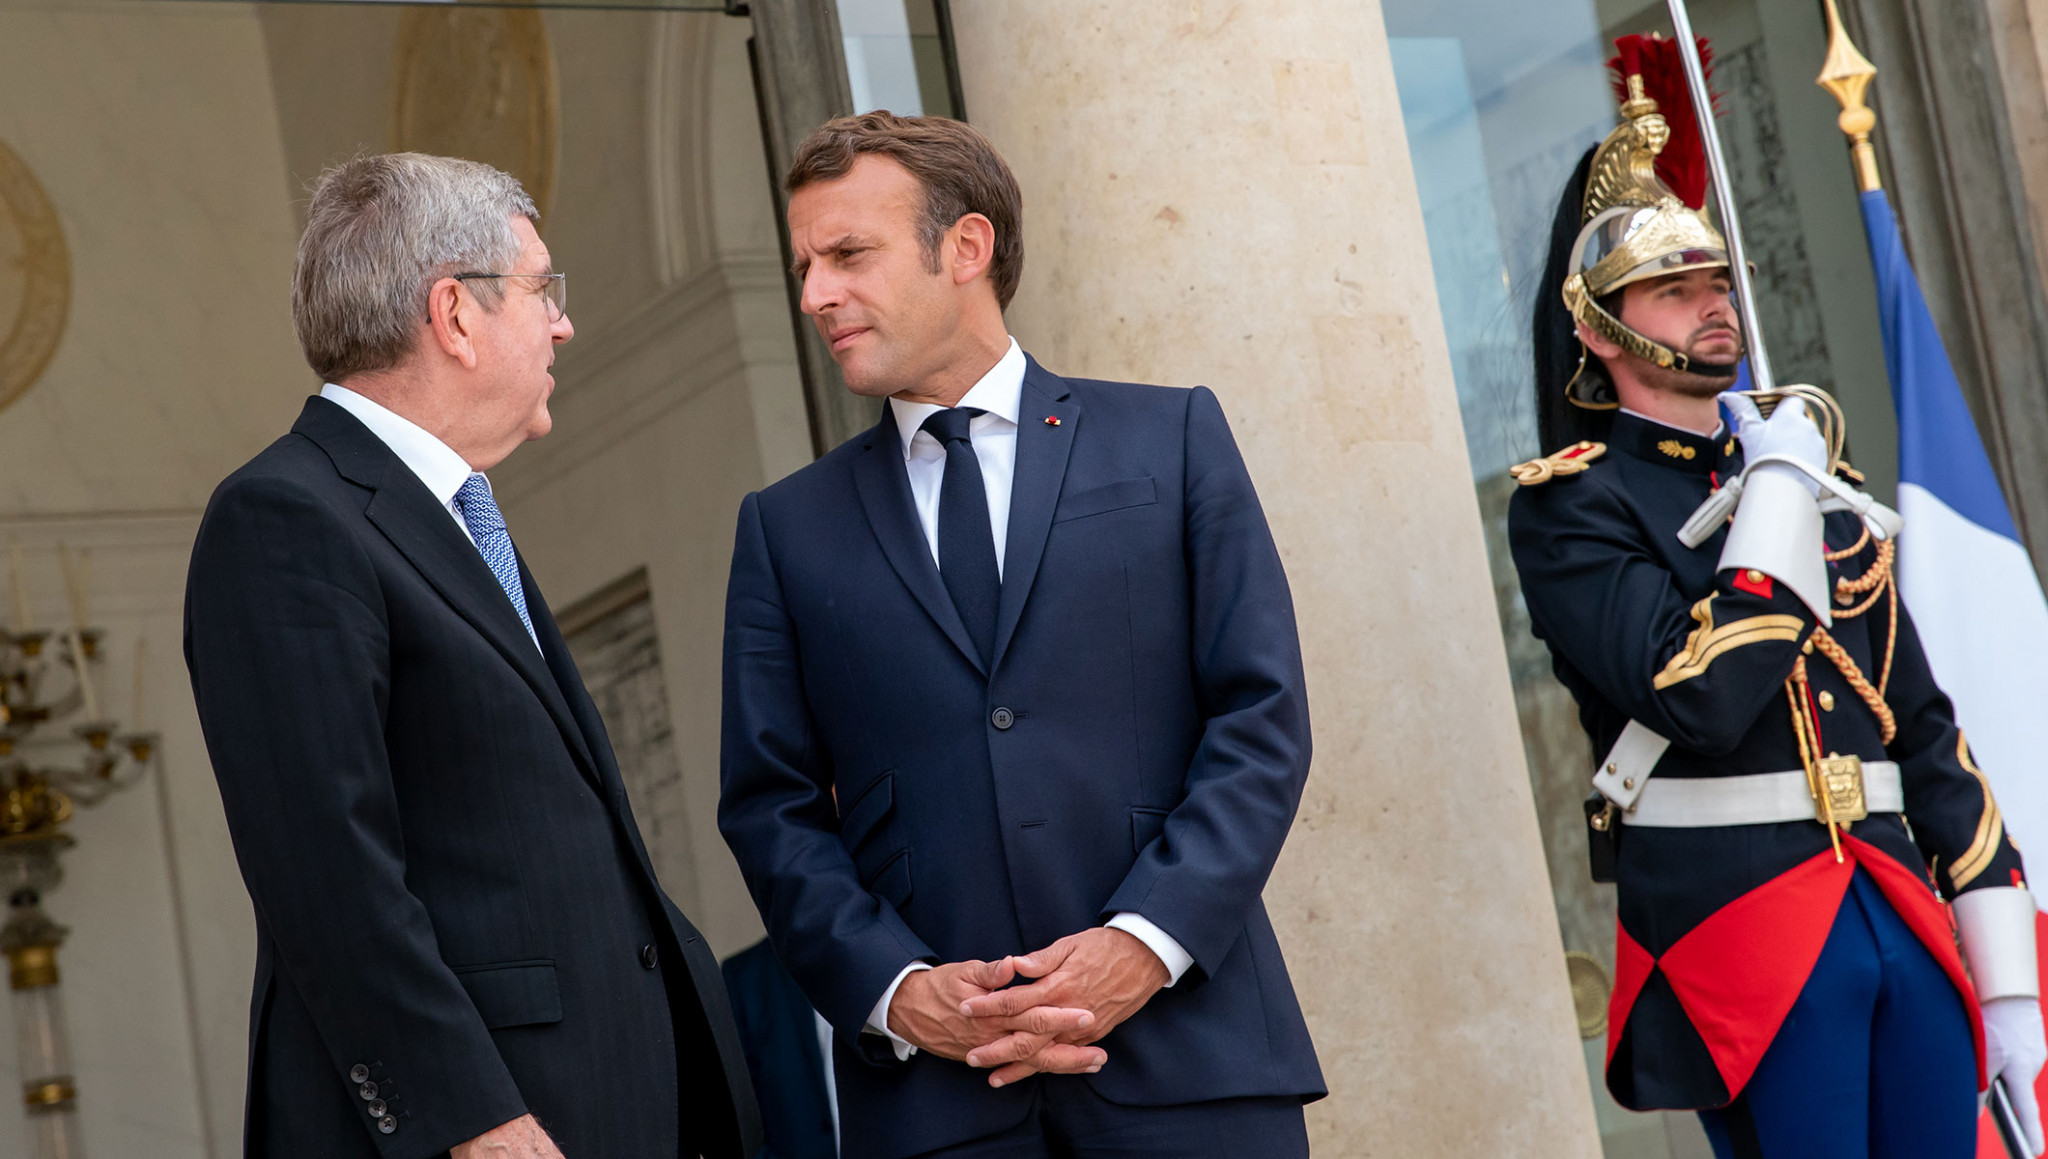 French President Emmanuel Macron welcomed Thomas Bach to the Élysée Palace ©President of France